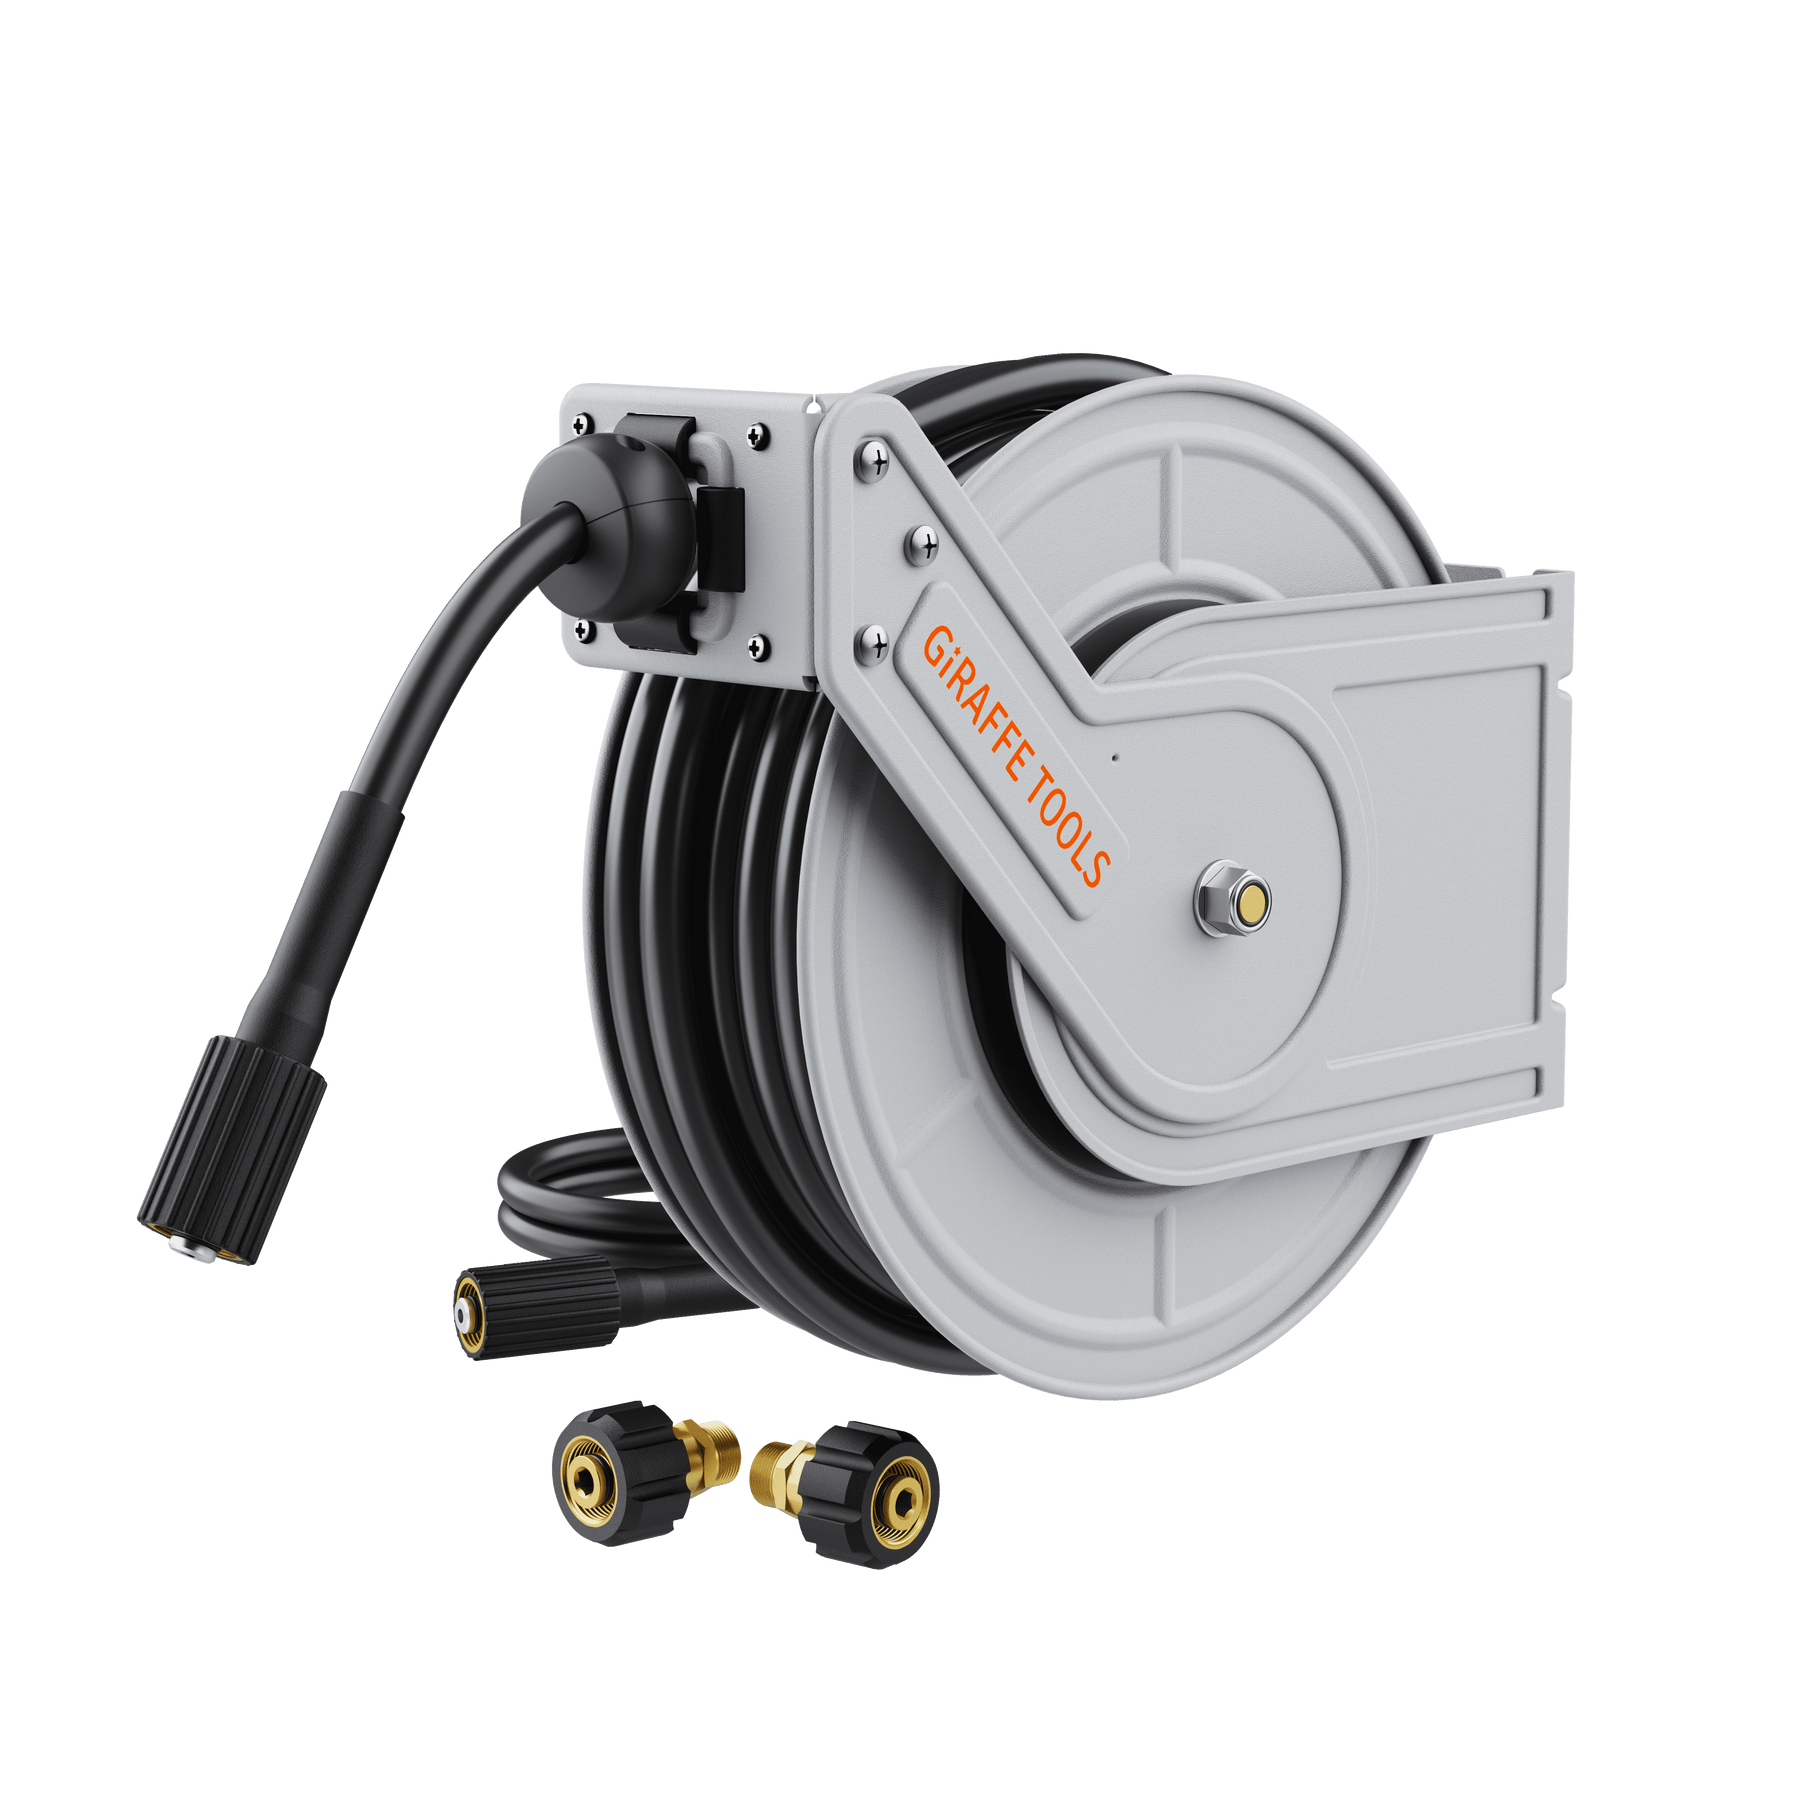 Giraffe Tools Retractable Pressure Washer Hose Reel, Wall Mount Pressure  Washer Reel with 1/4 x 65 ft Pressure Hose, Heavy Duty Steel Power Washer  Reel, 3200PSI, 2 * M22-15mm Connectors : 